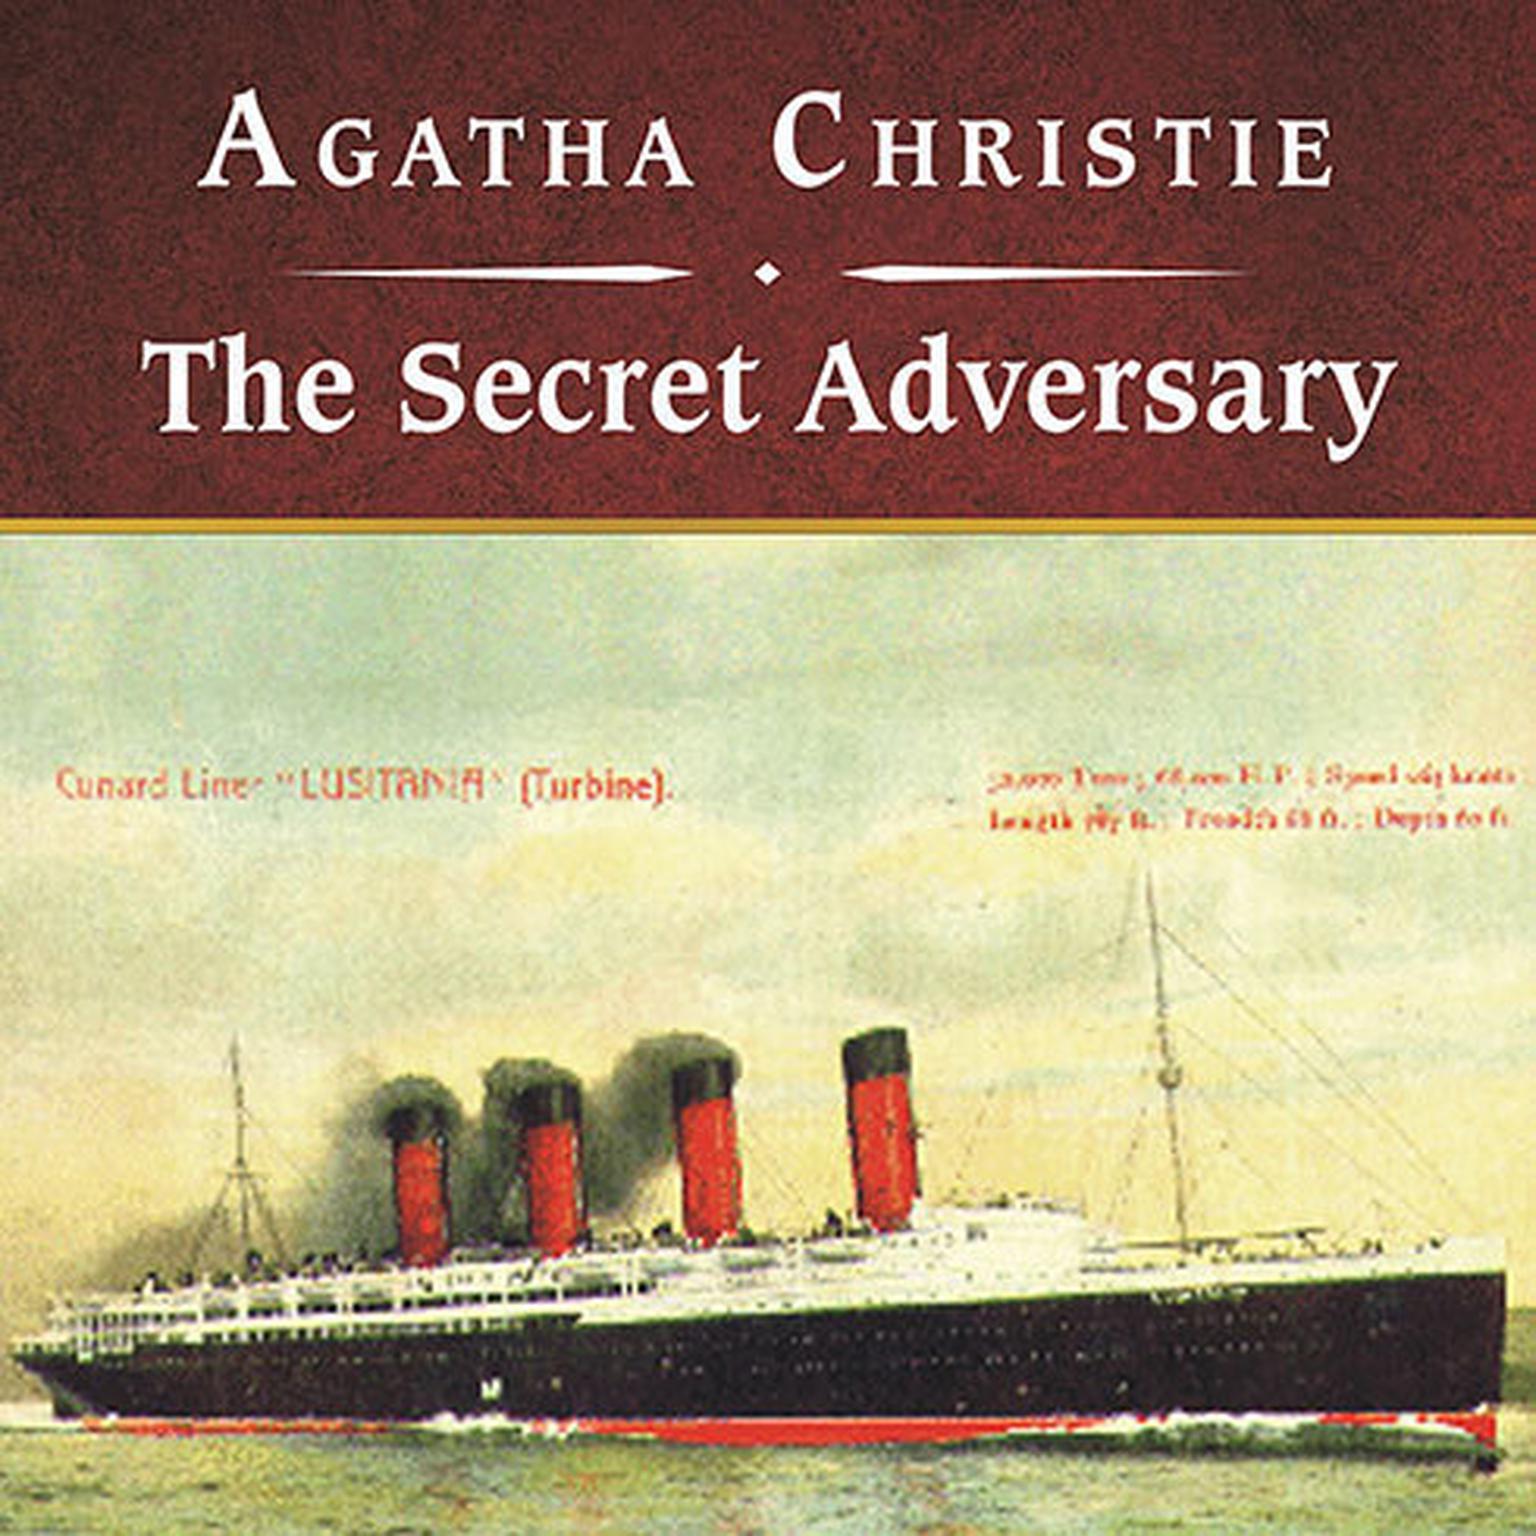 The Secret Adversary, with eBook Audiobook, by Agatha Christie